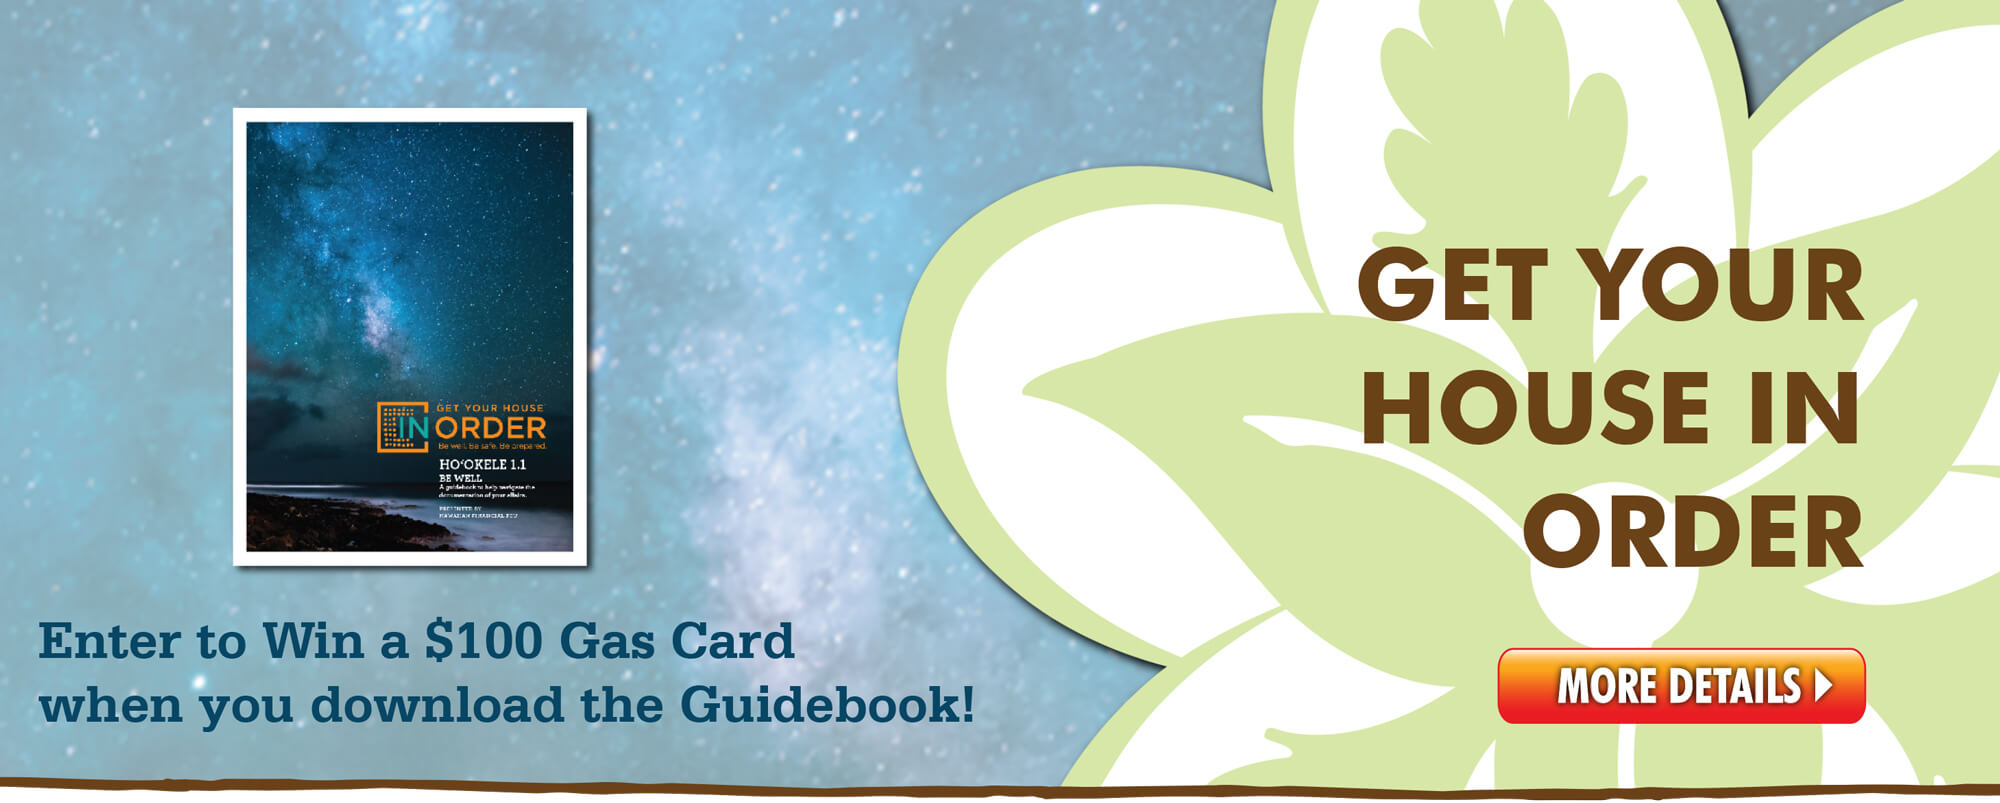 Hele Mai and Get Your House in Order!  Download the Ho'okele Guidebook today and enter to win a $100 Hele Gas Card!